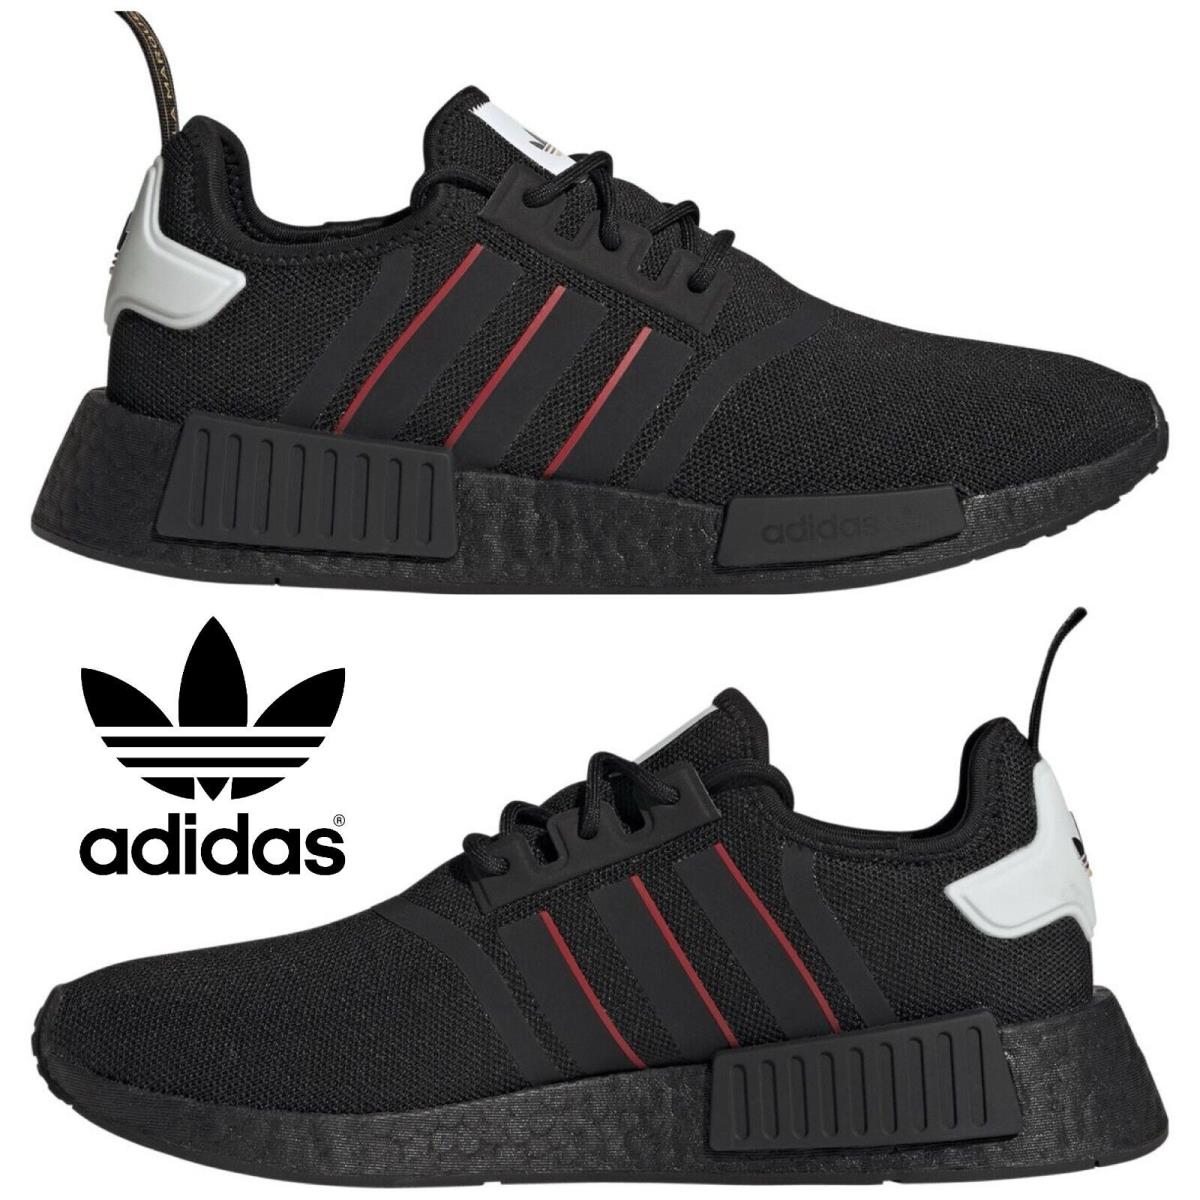 Adidas Originals Nmd R1 Men`s Sneakers Running Shoes Gym Casual Sport Black Red